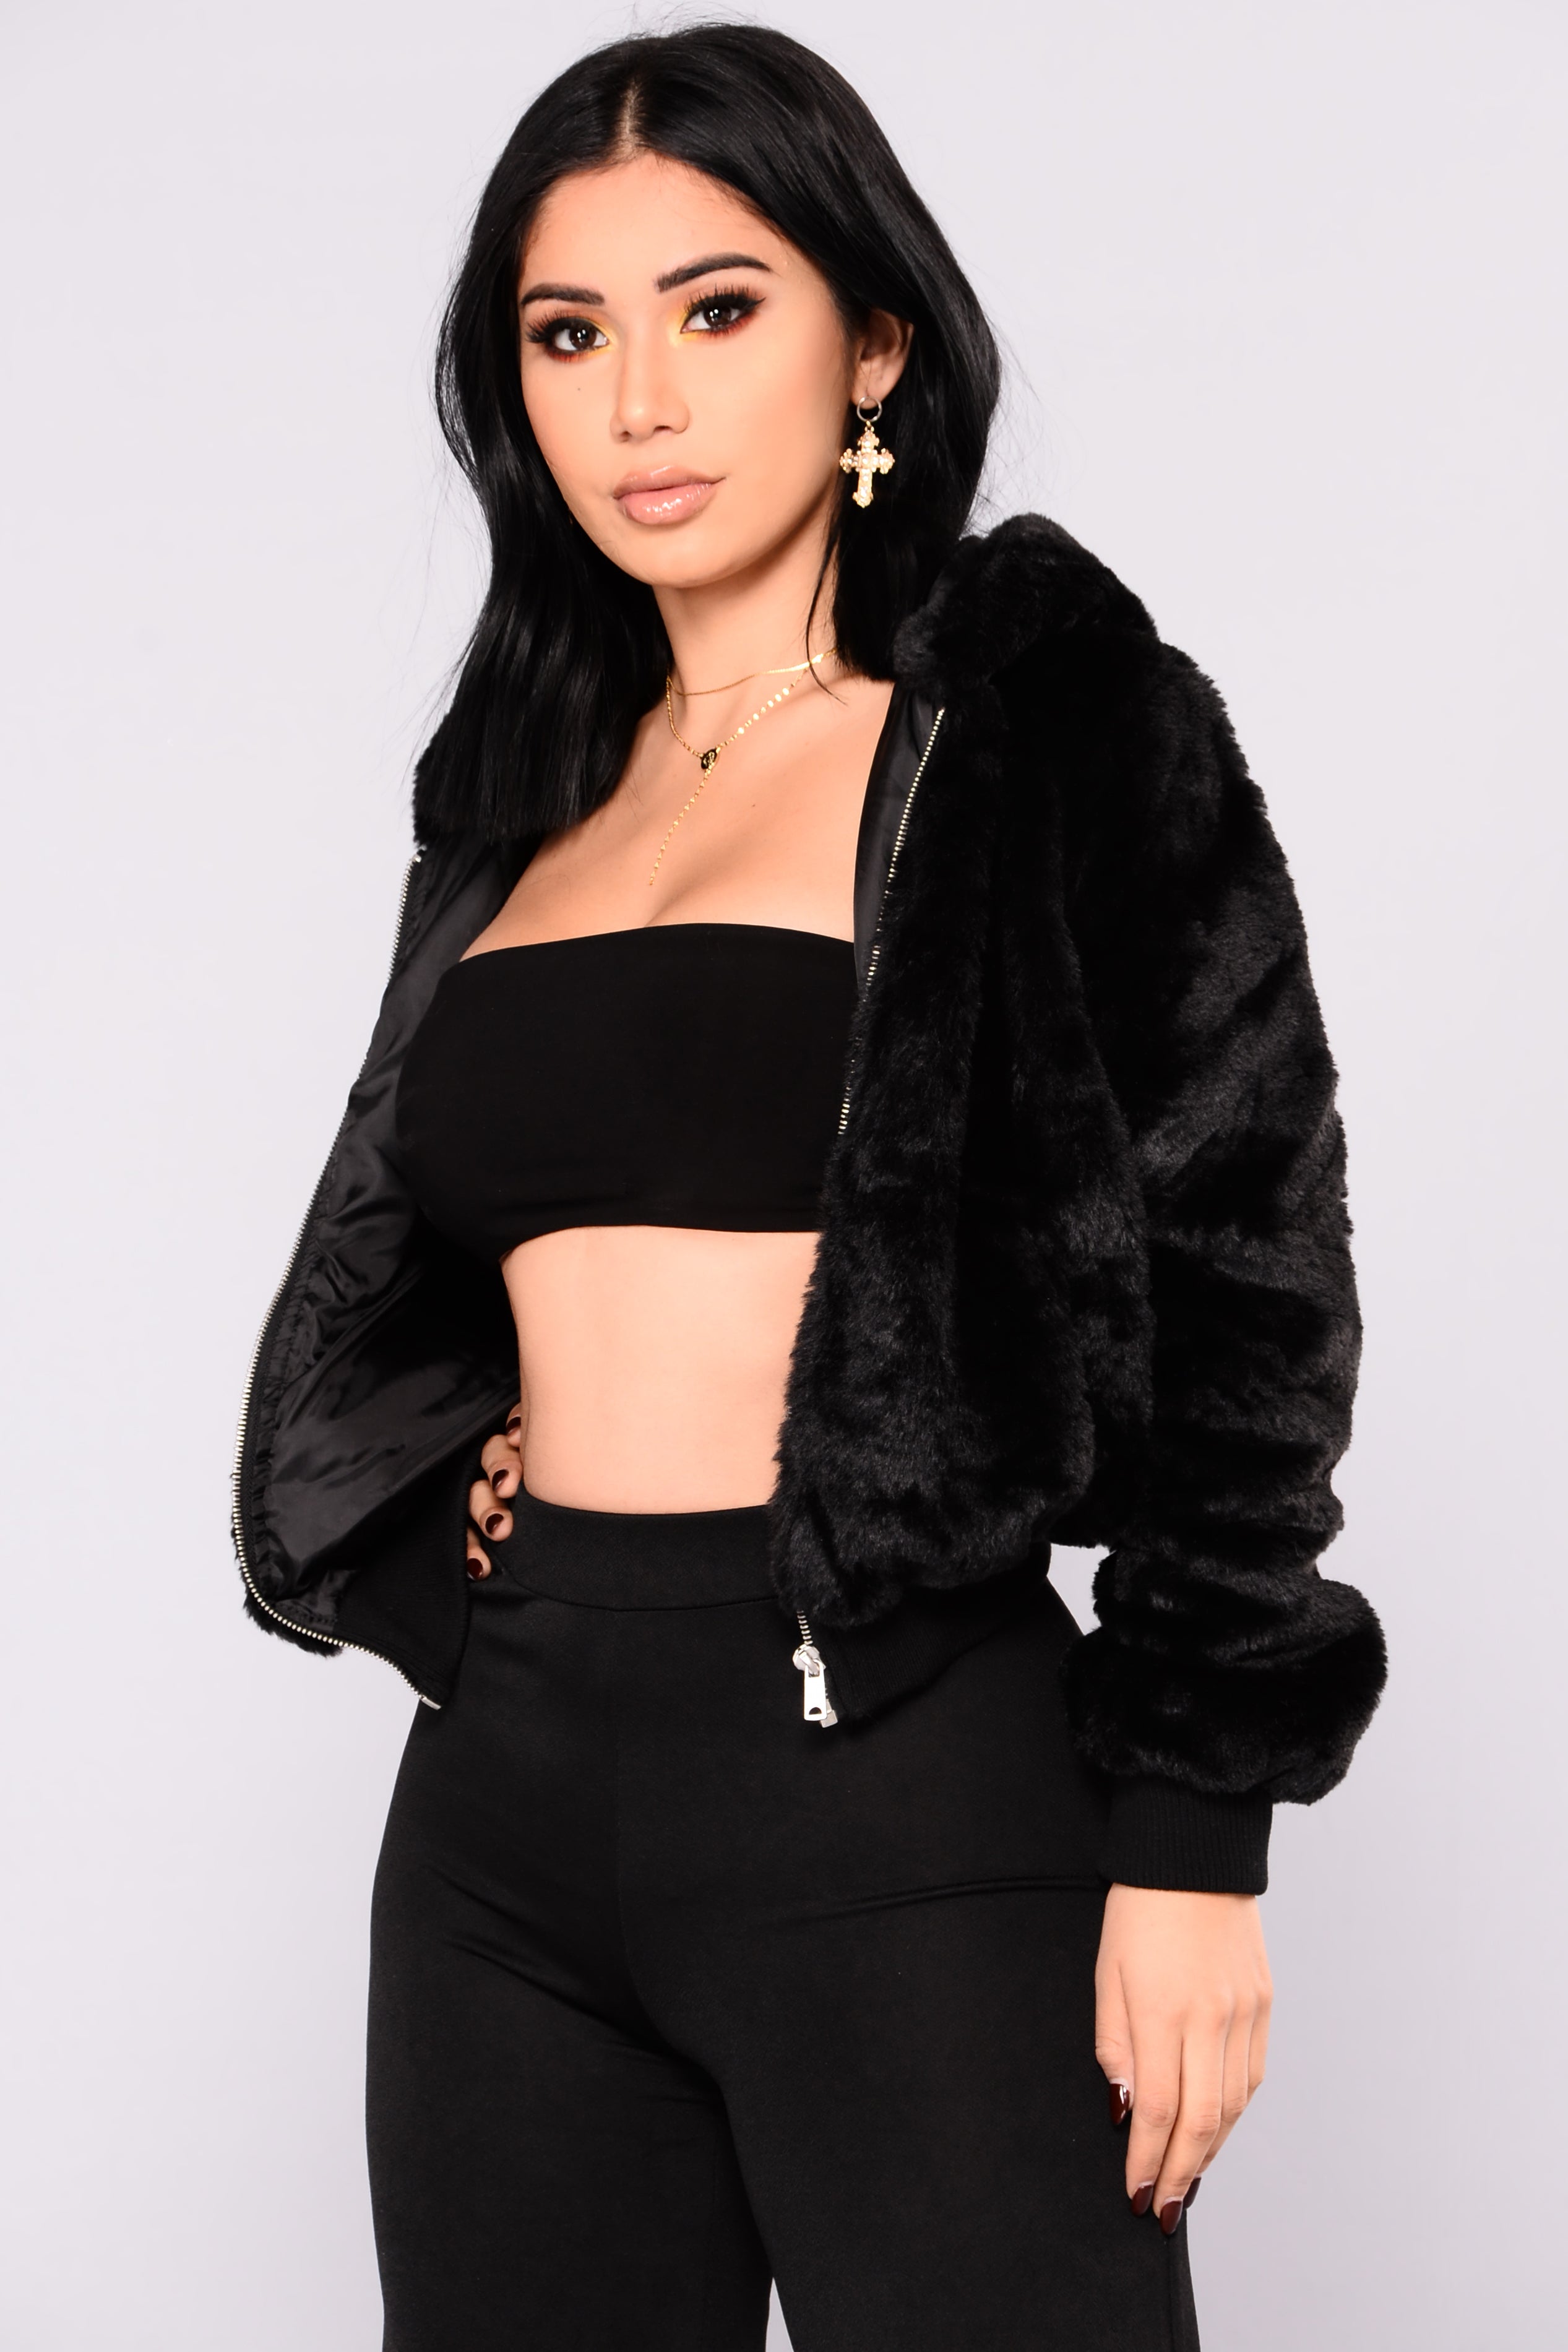 schott padded jacket with hood lining and faux fur collar